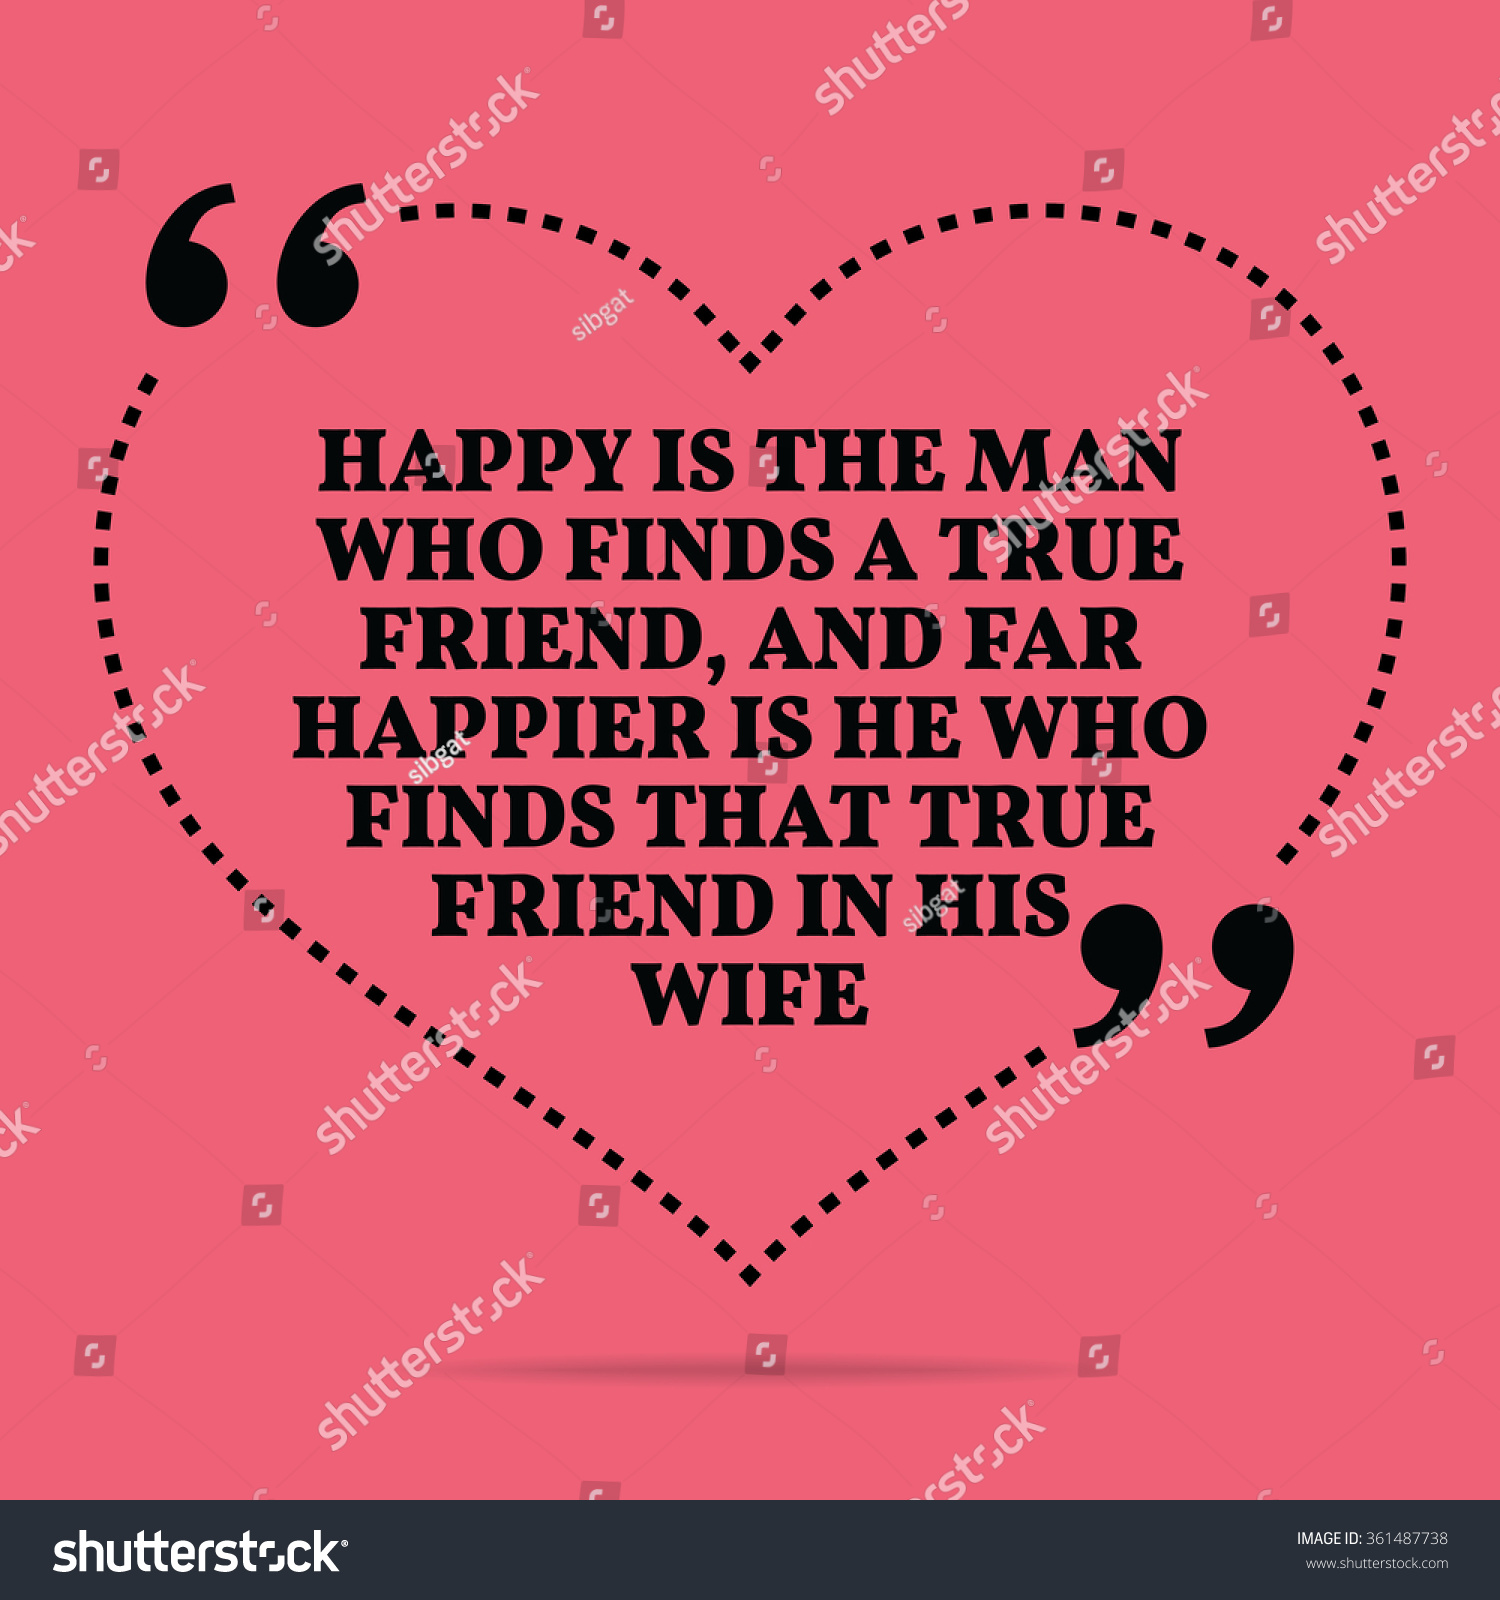 Inspirational love marriage quote Happy is the man who finds a true friend and